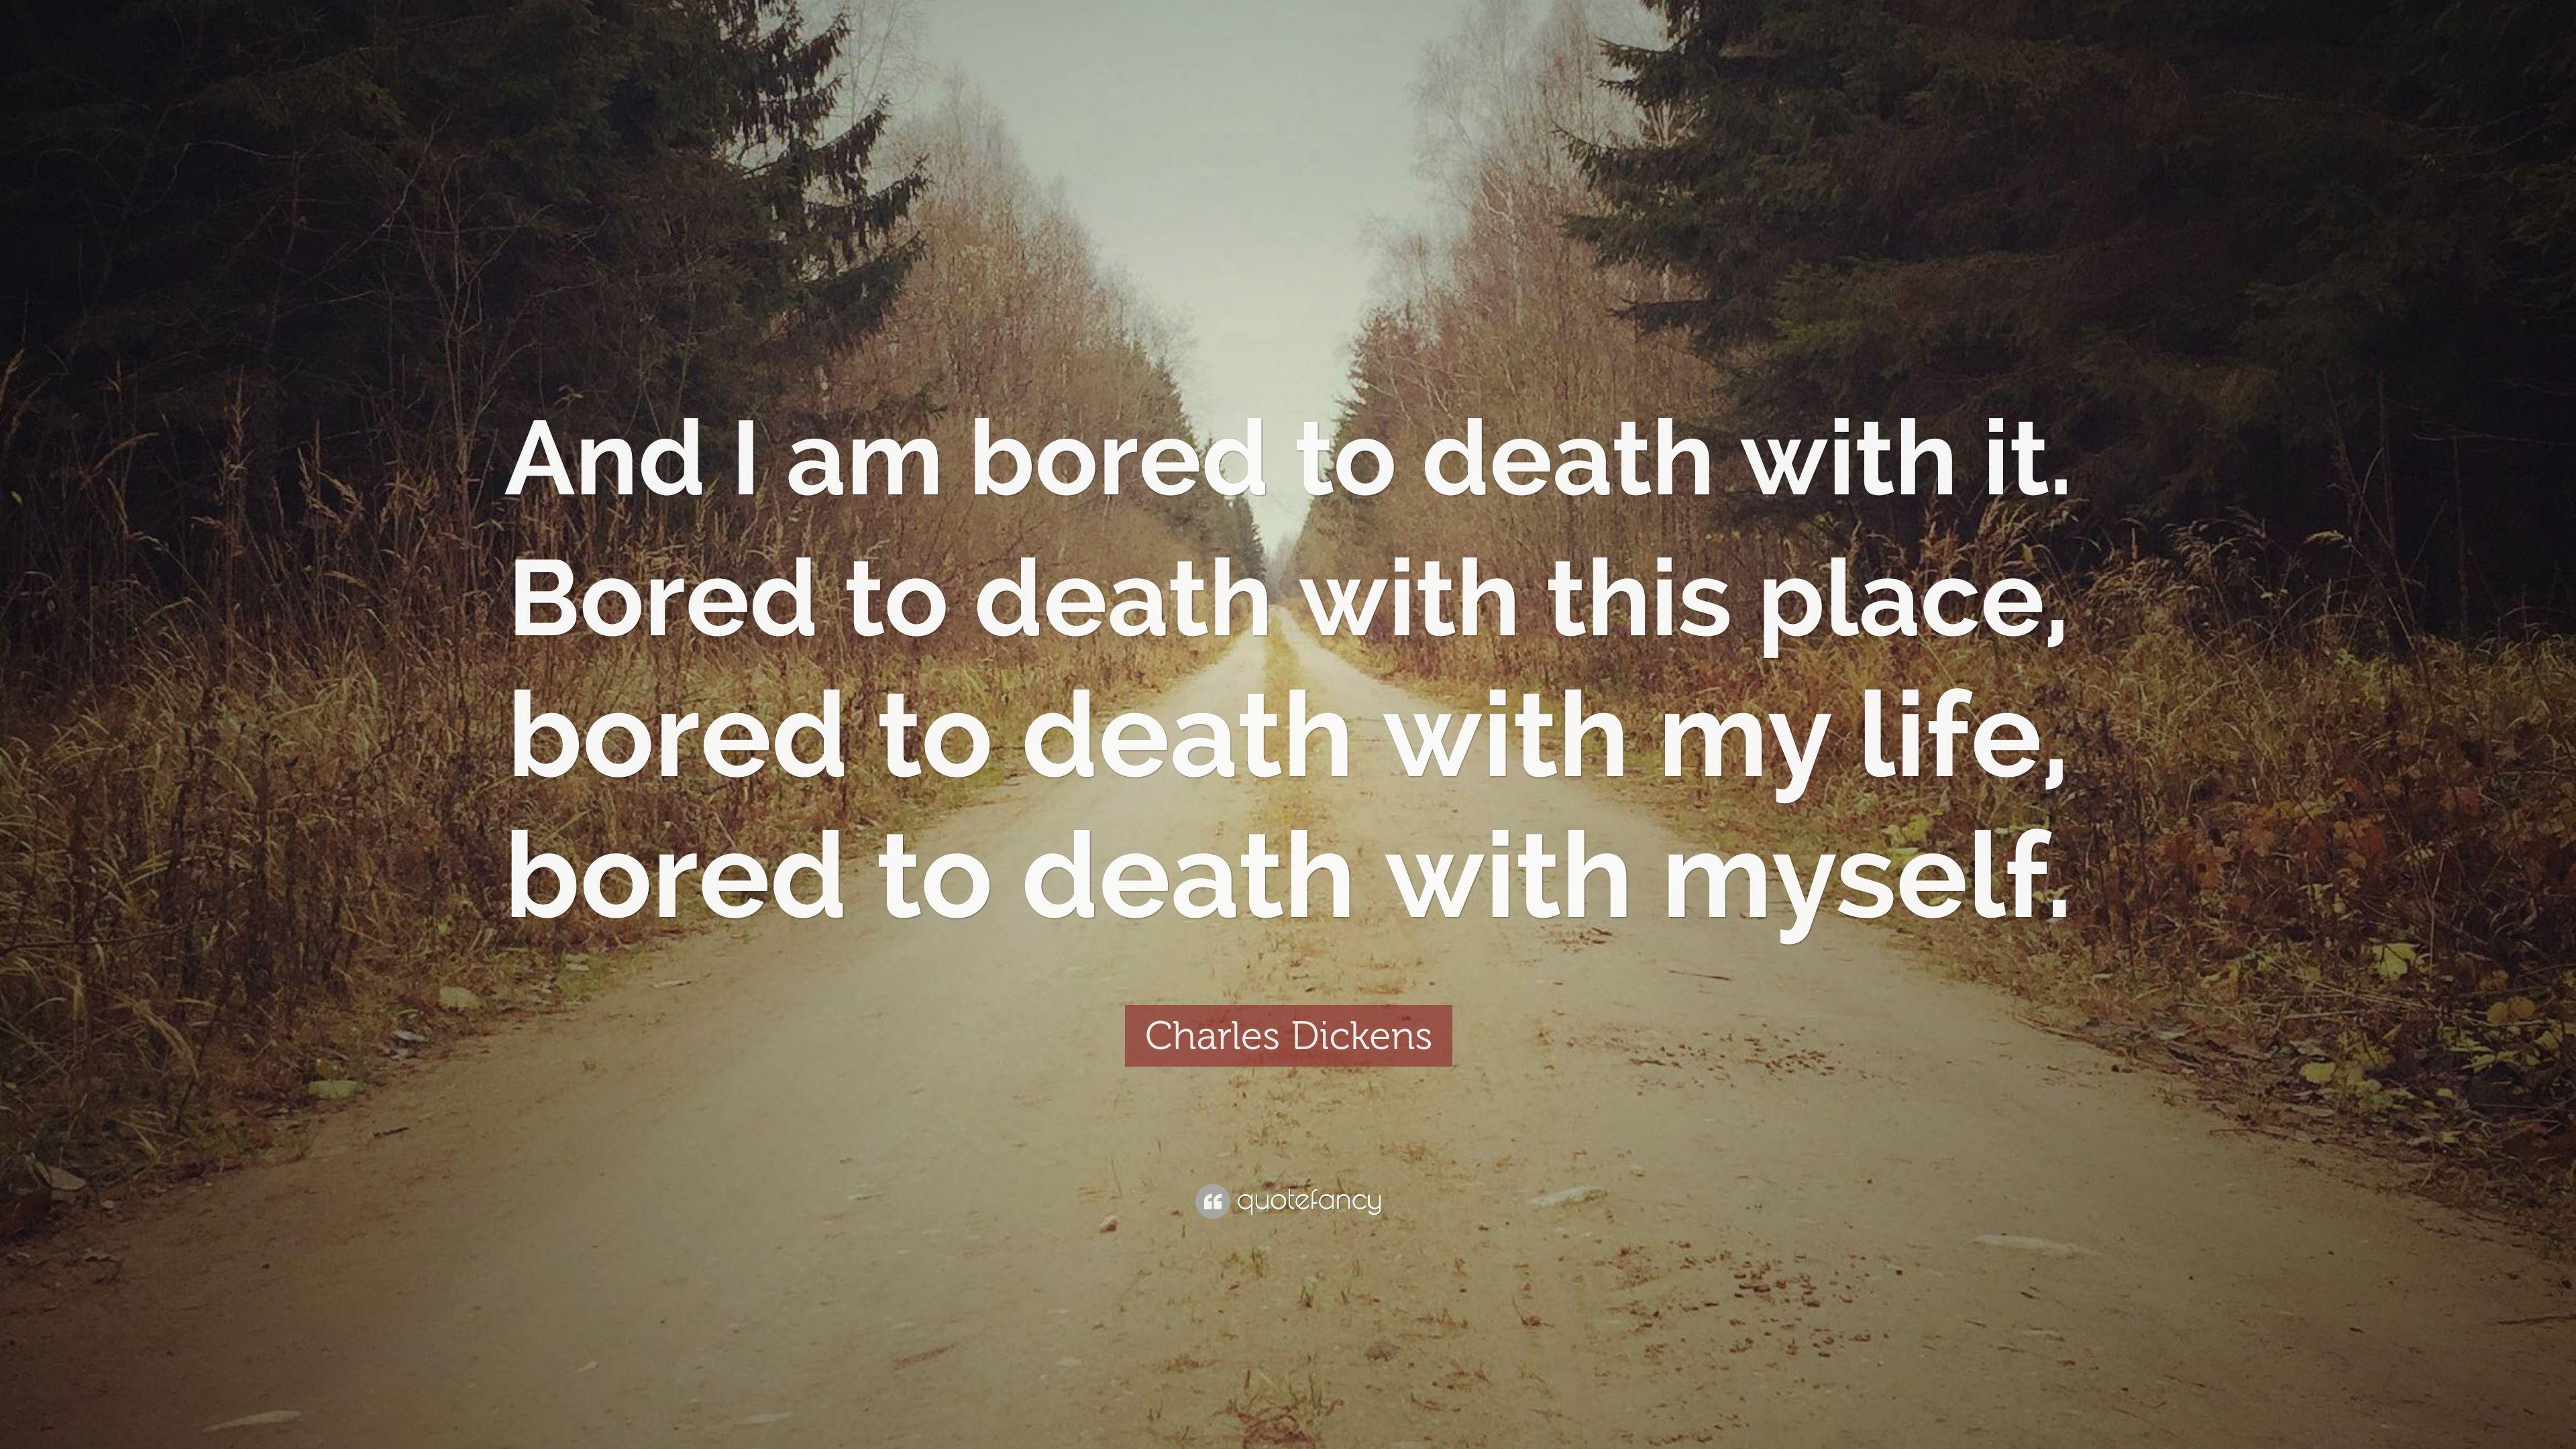 Charles Dickens Quote: “And I am bored to death with it. Bored to